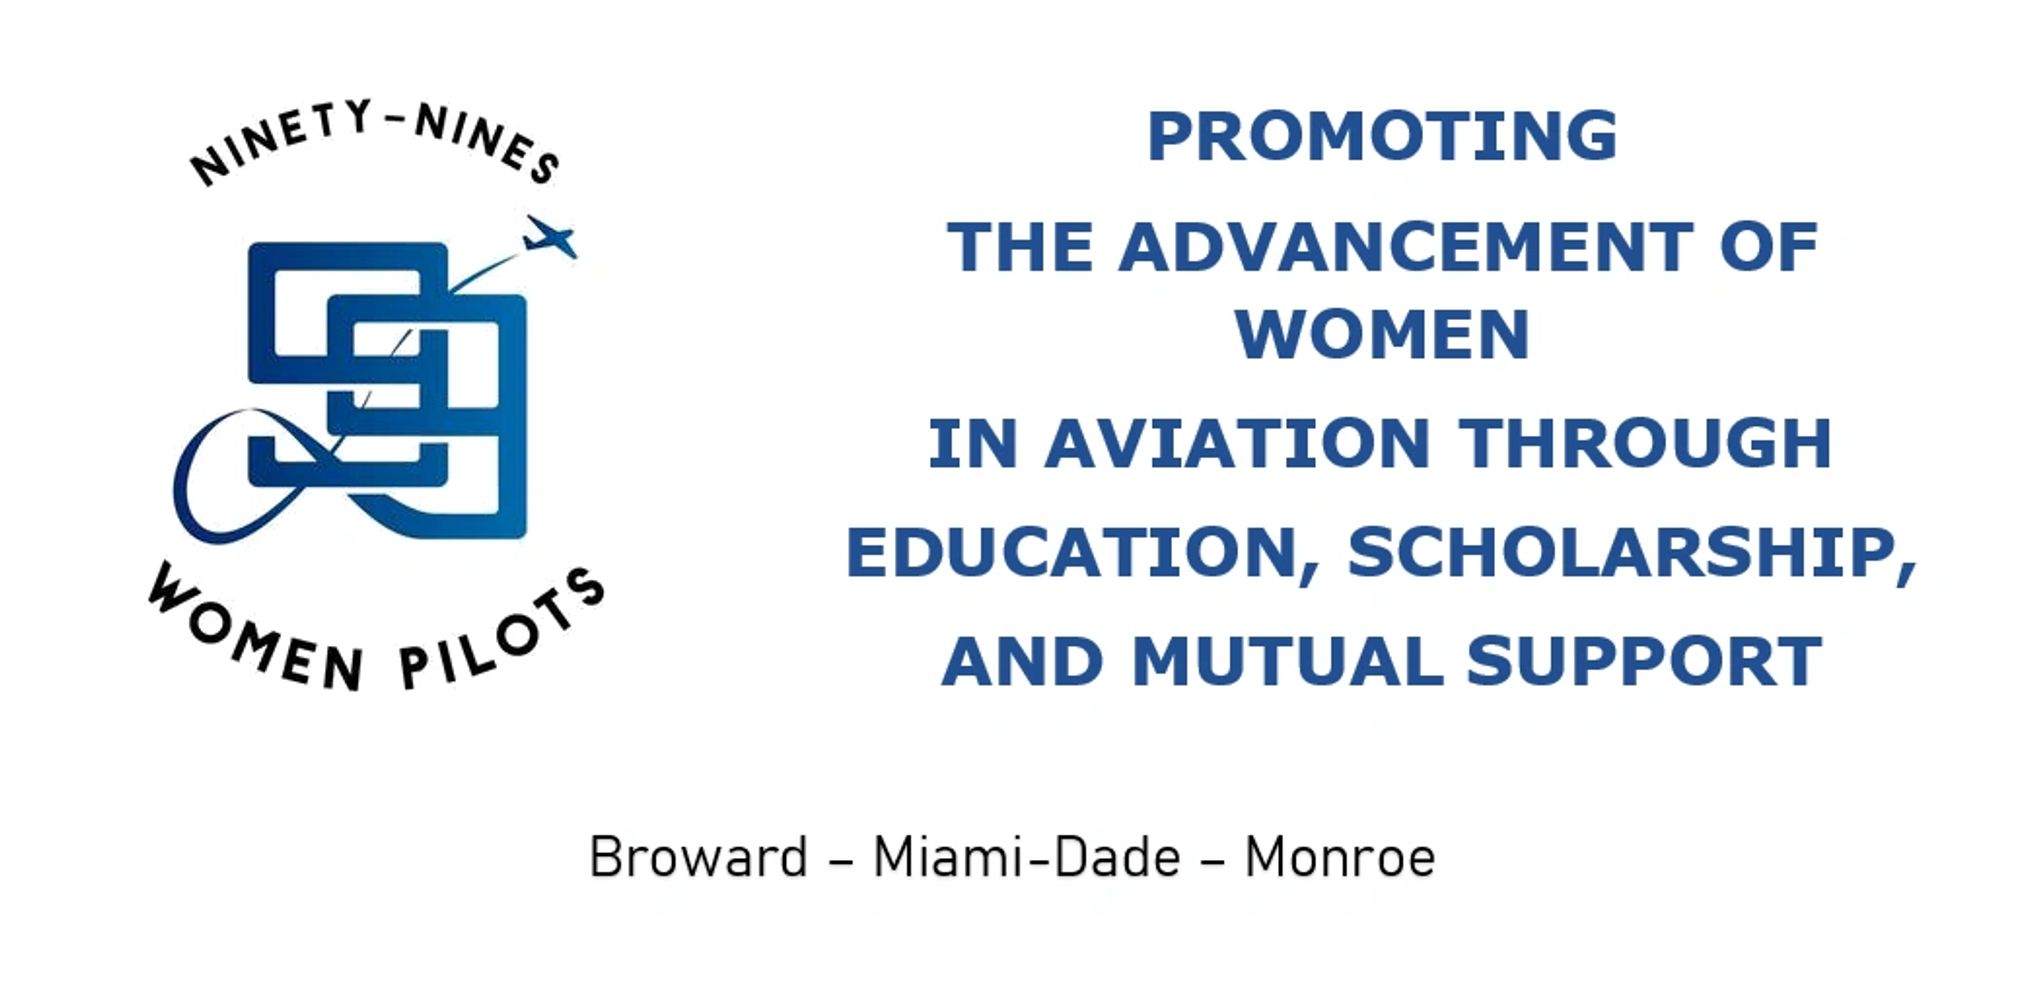 promoting the advancement of women in aviation through education scholarship and mutual support